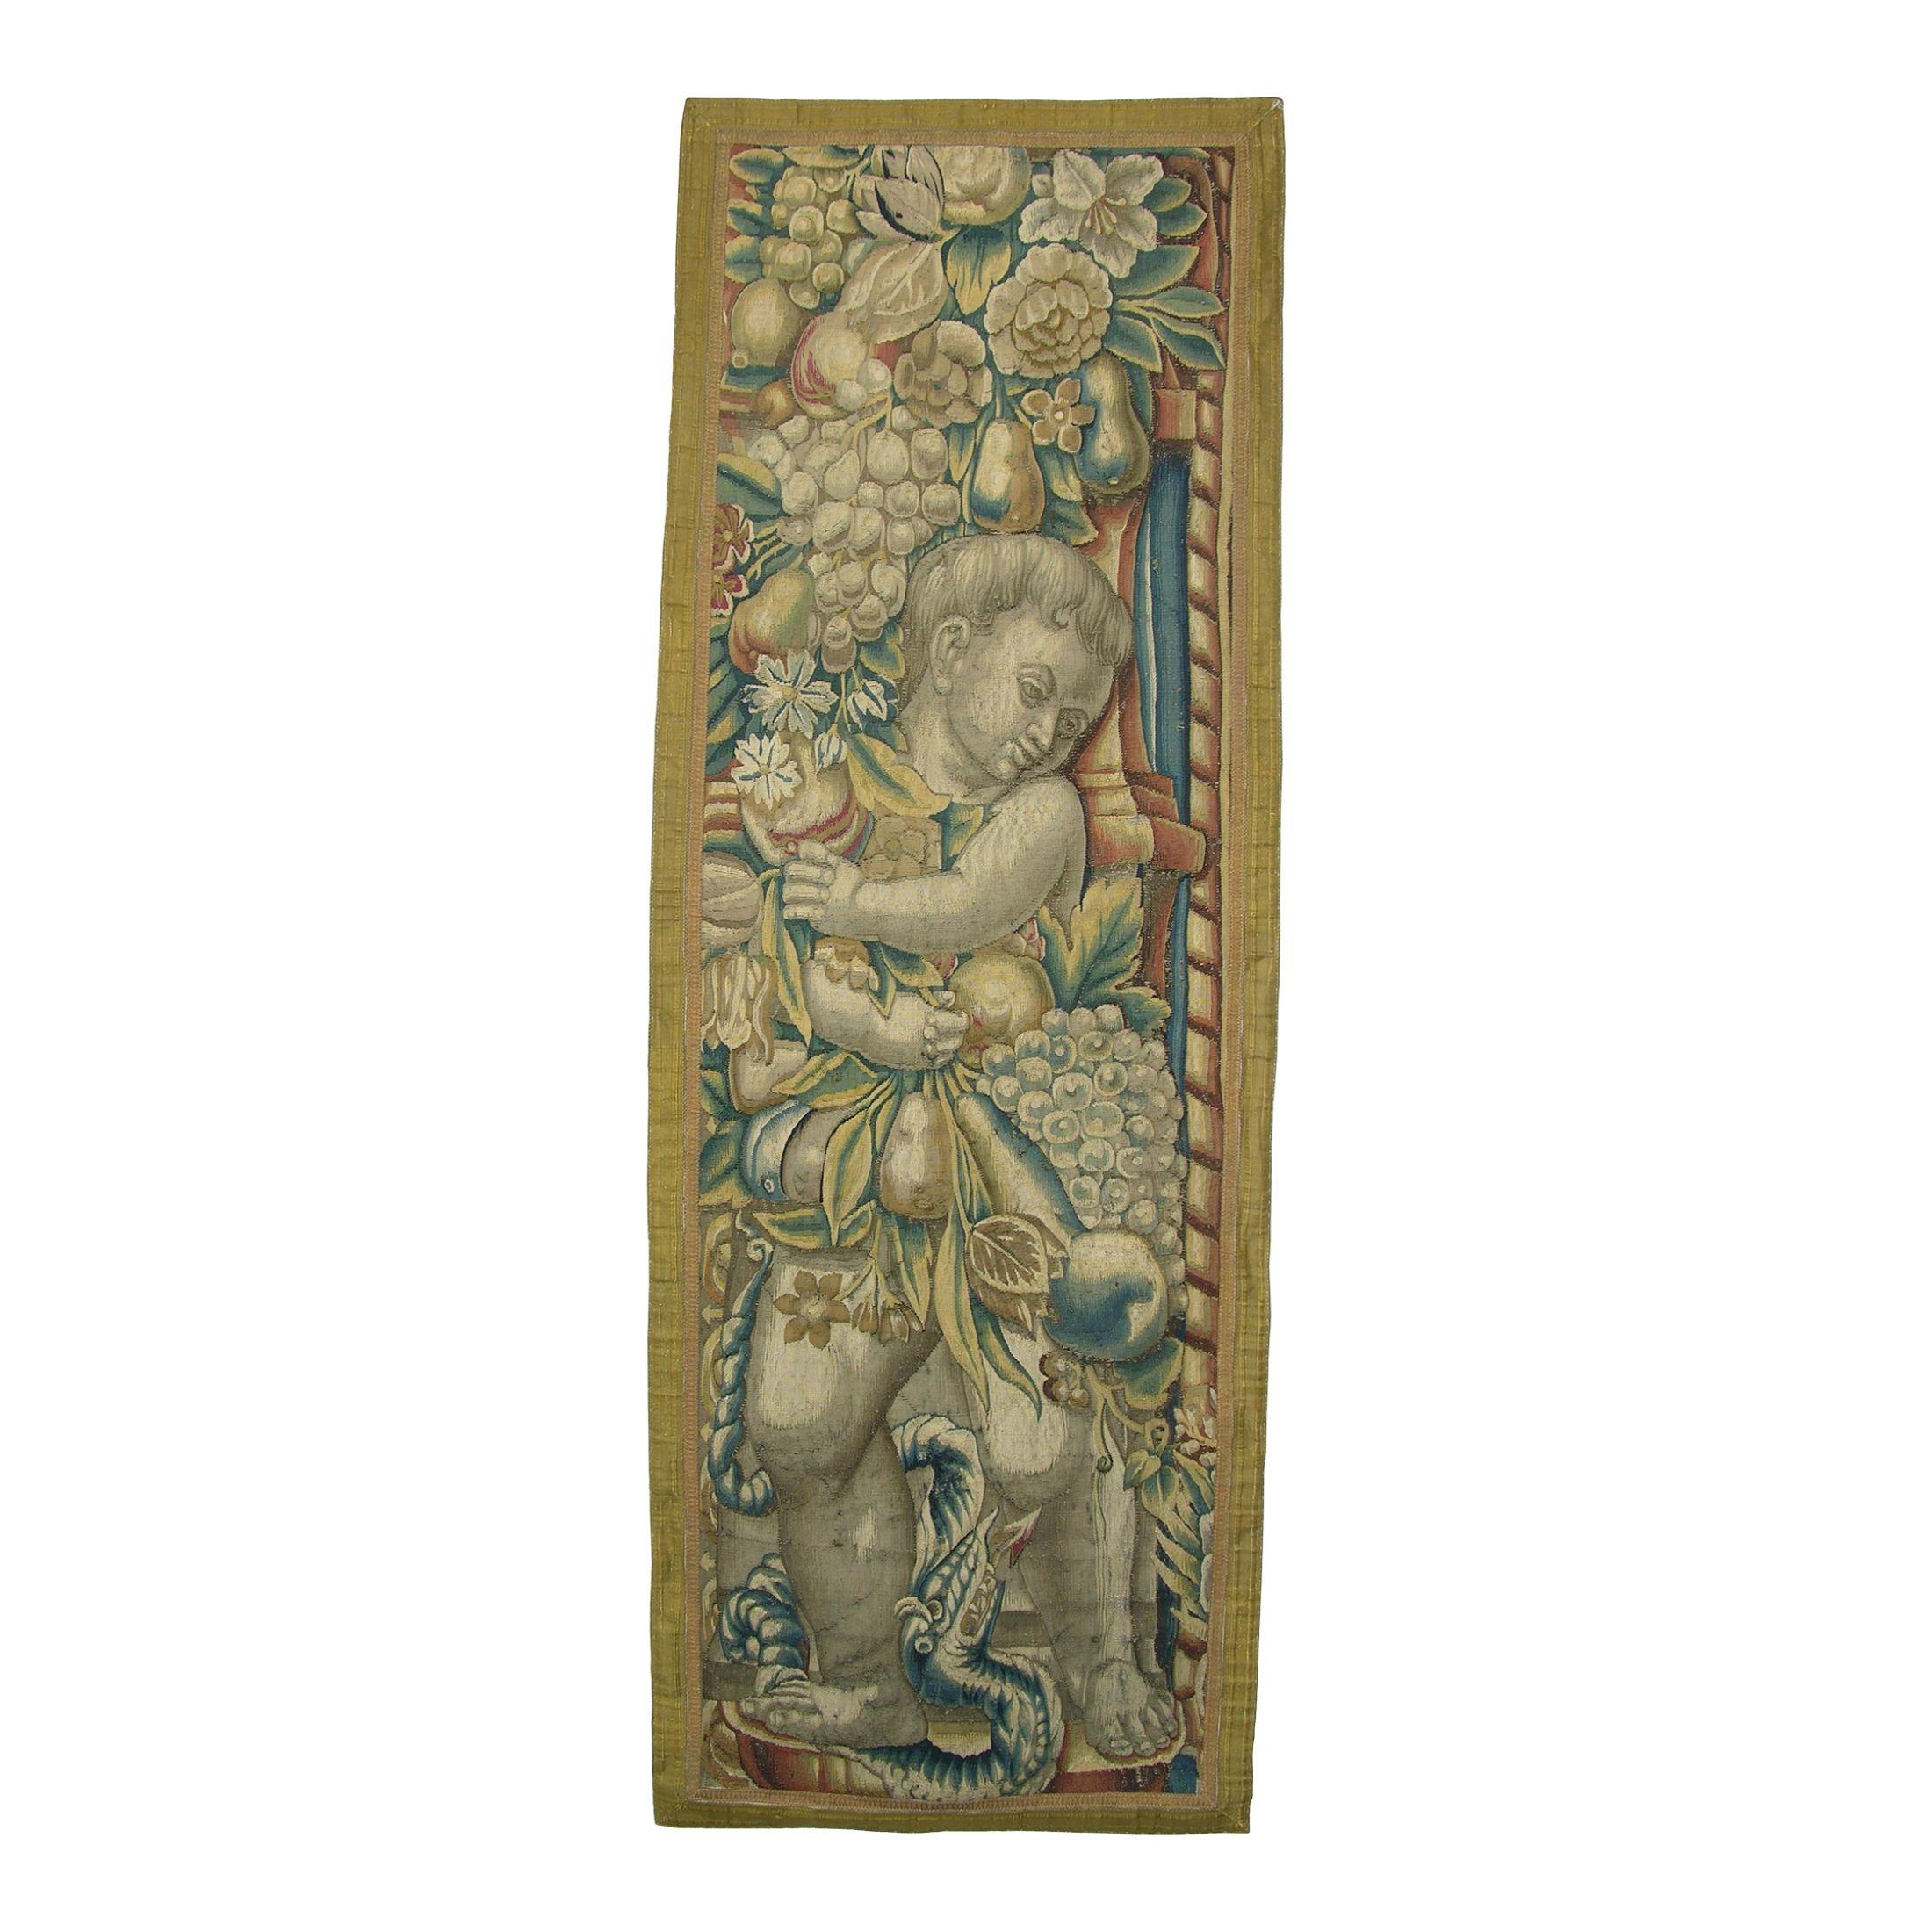 Antique 17th Century Brussels Tapestry 5'7" X 1'11"